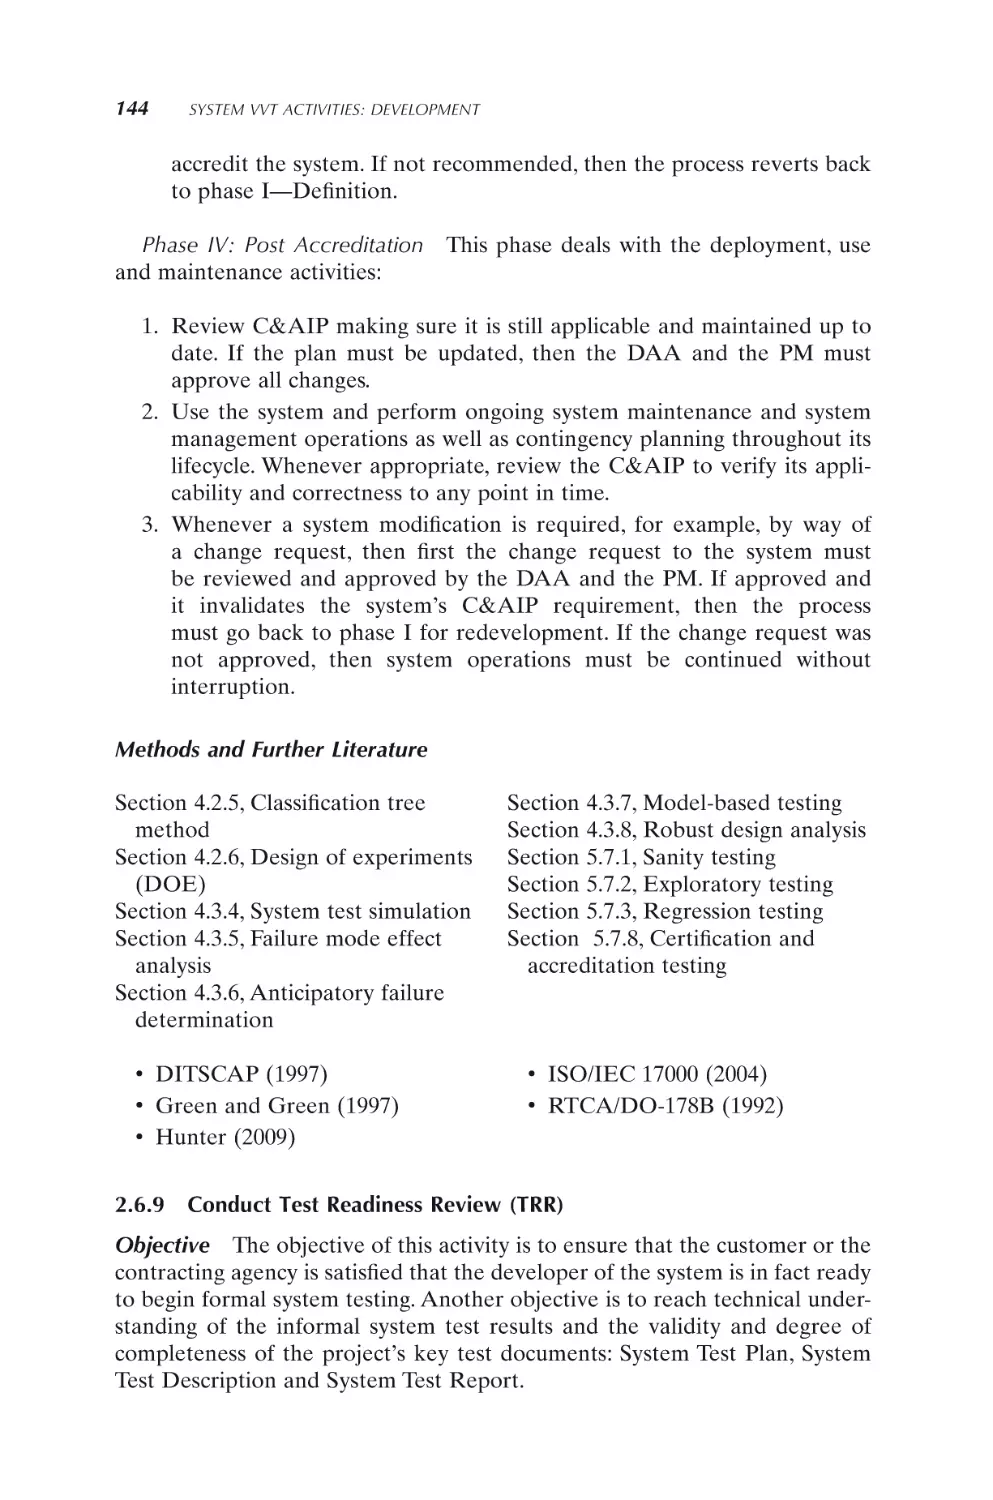 2.6.9 Conduct Test Readiness Review (TRR)